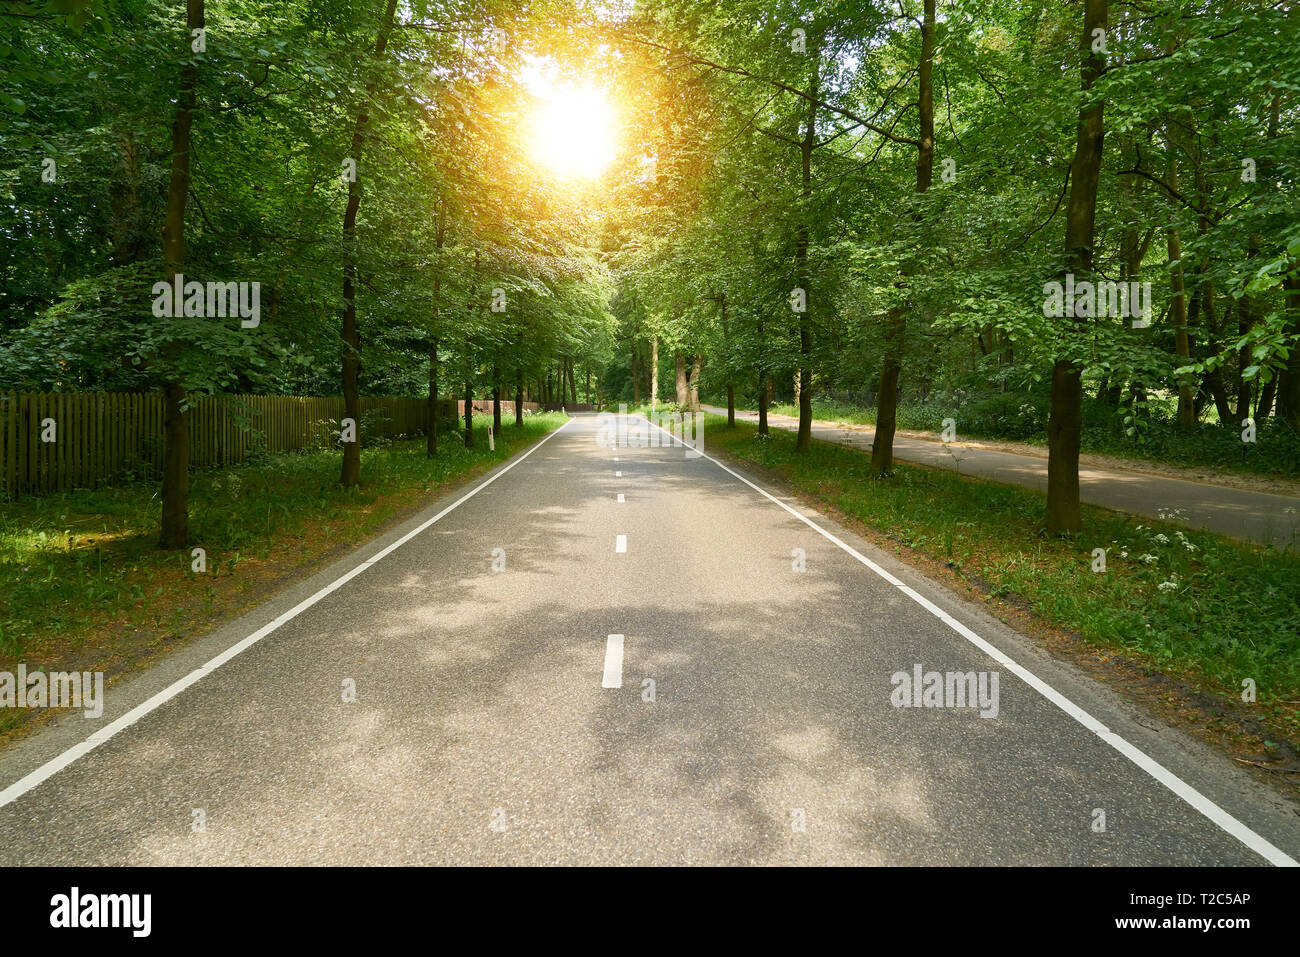 Just empty country road in summer with sun between trees Stock Photo